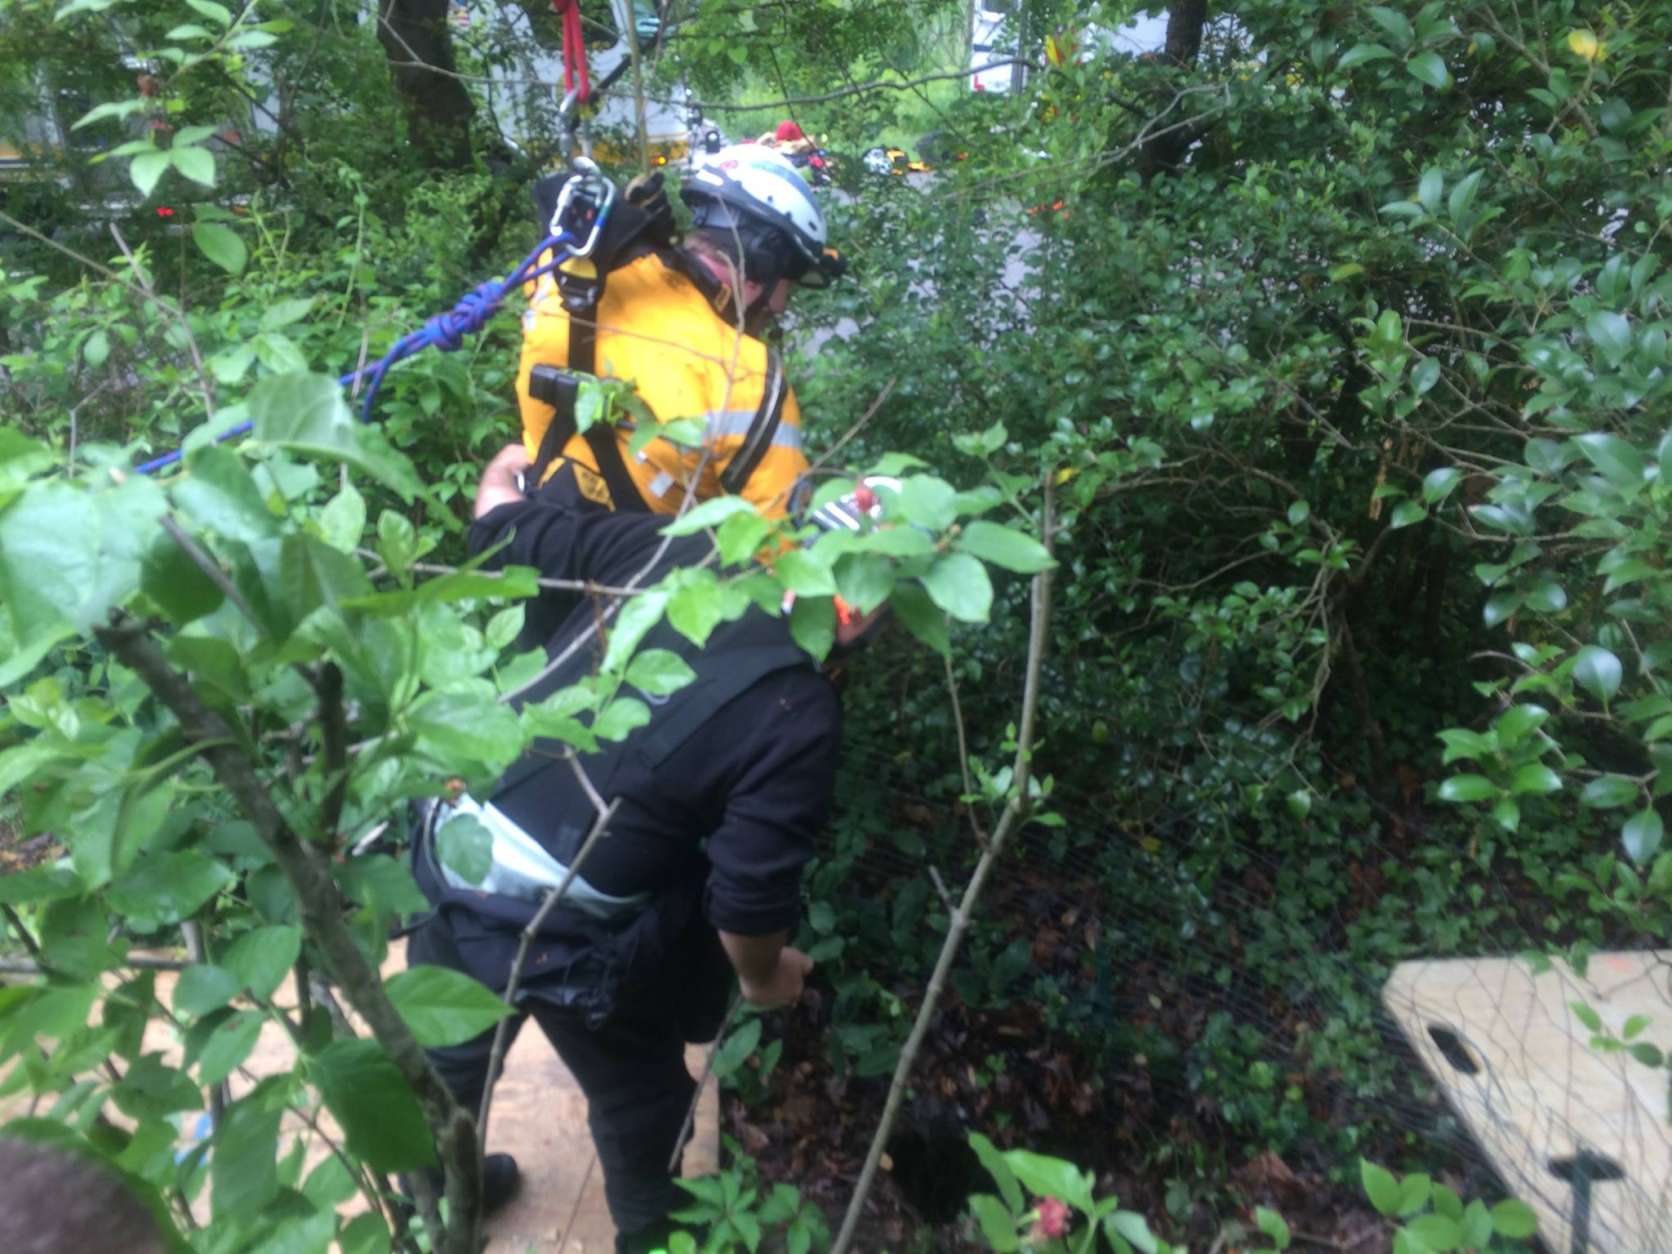 Firefighters rescued an 85-pound border collie that fell in a sinkhole in Woodland Beach. (Courtesy Anne Arundel County Fire Department)